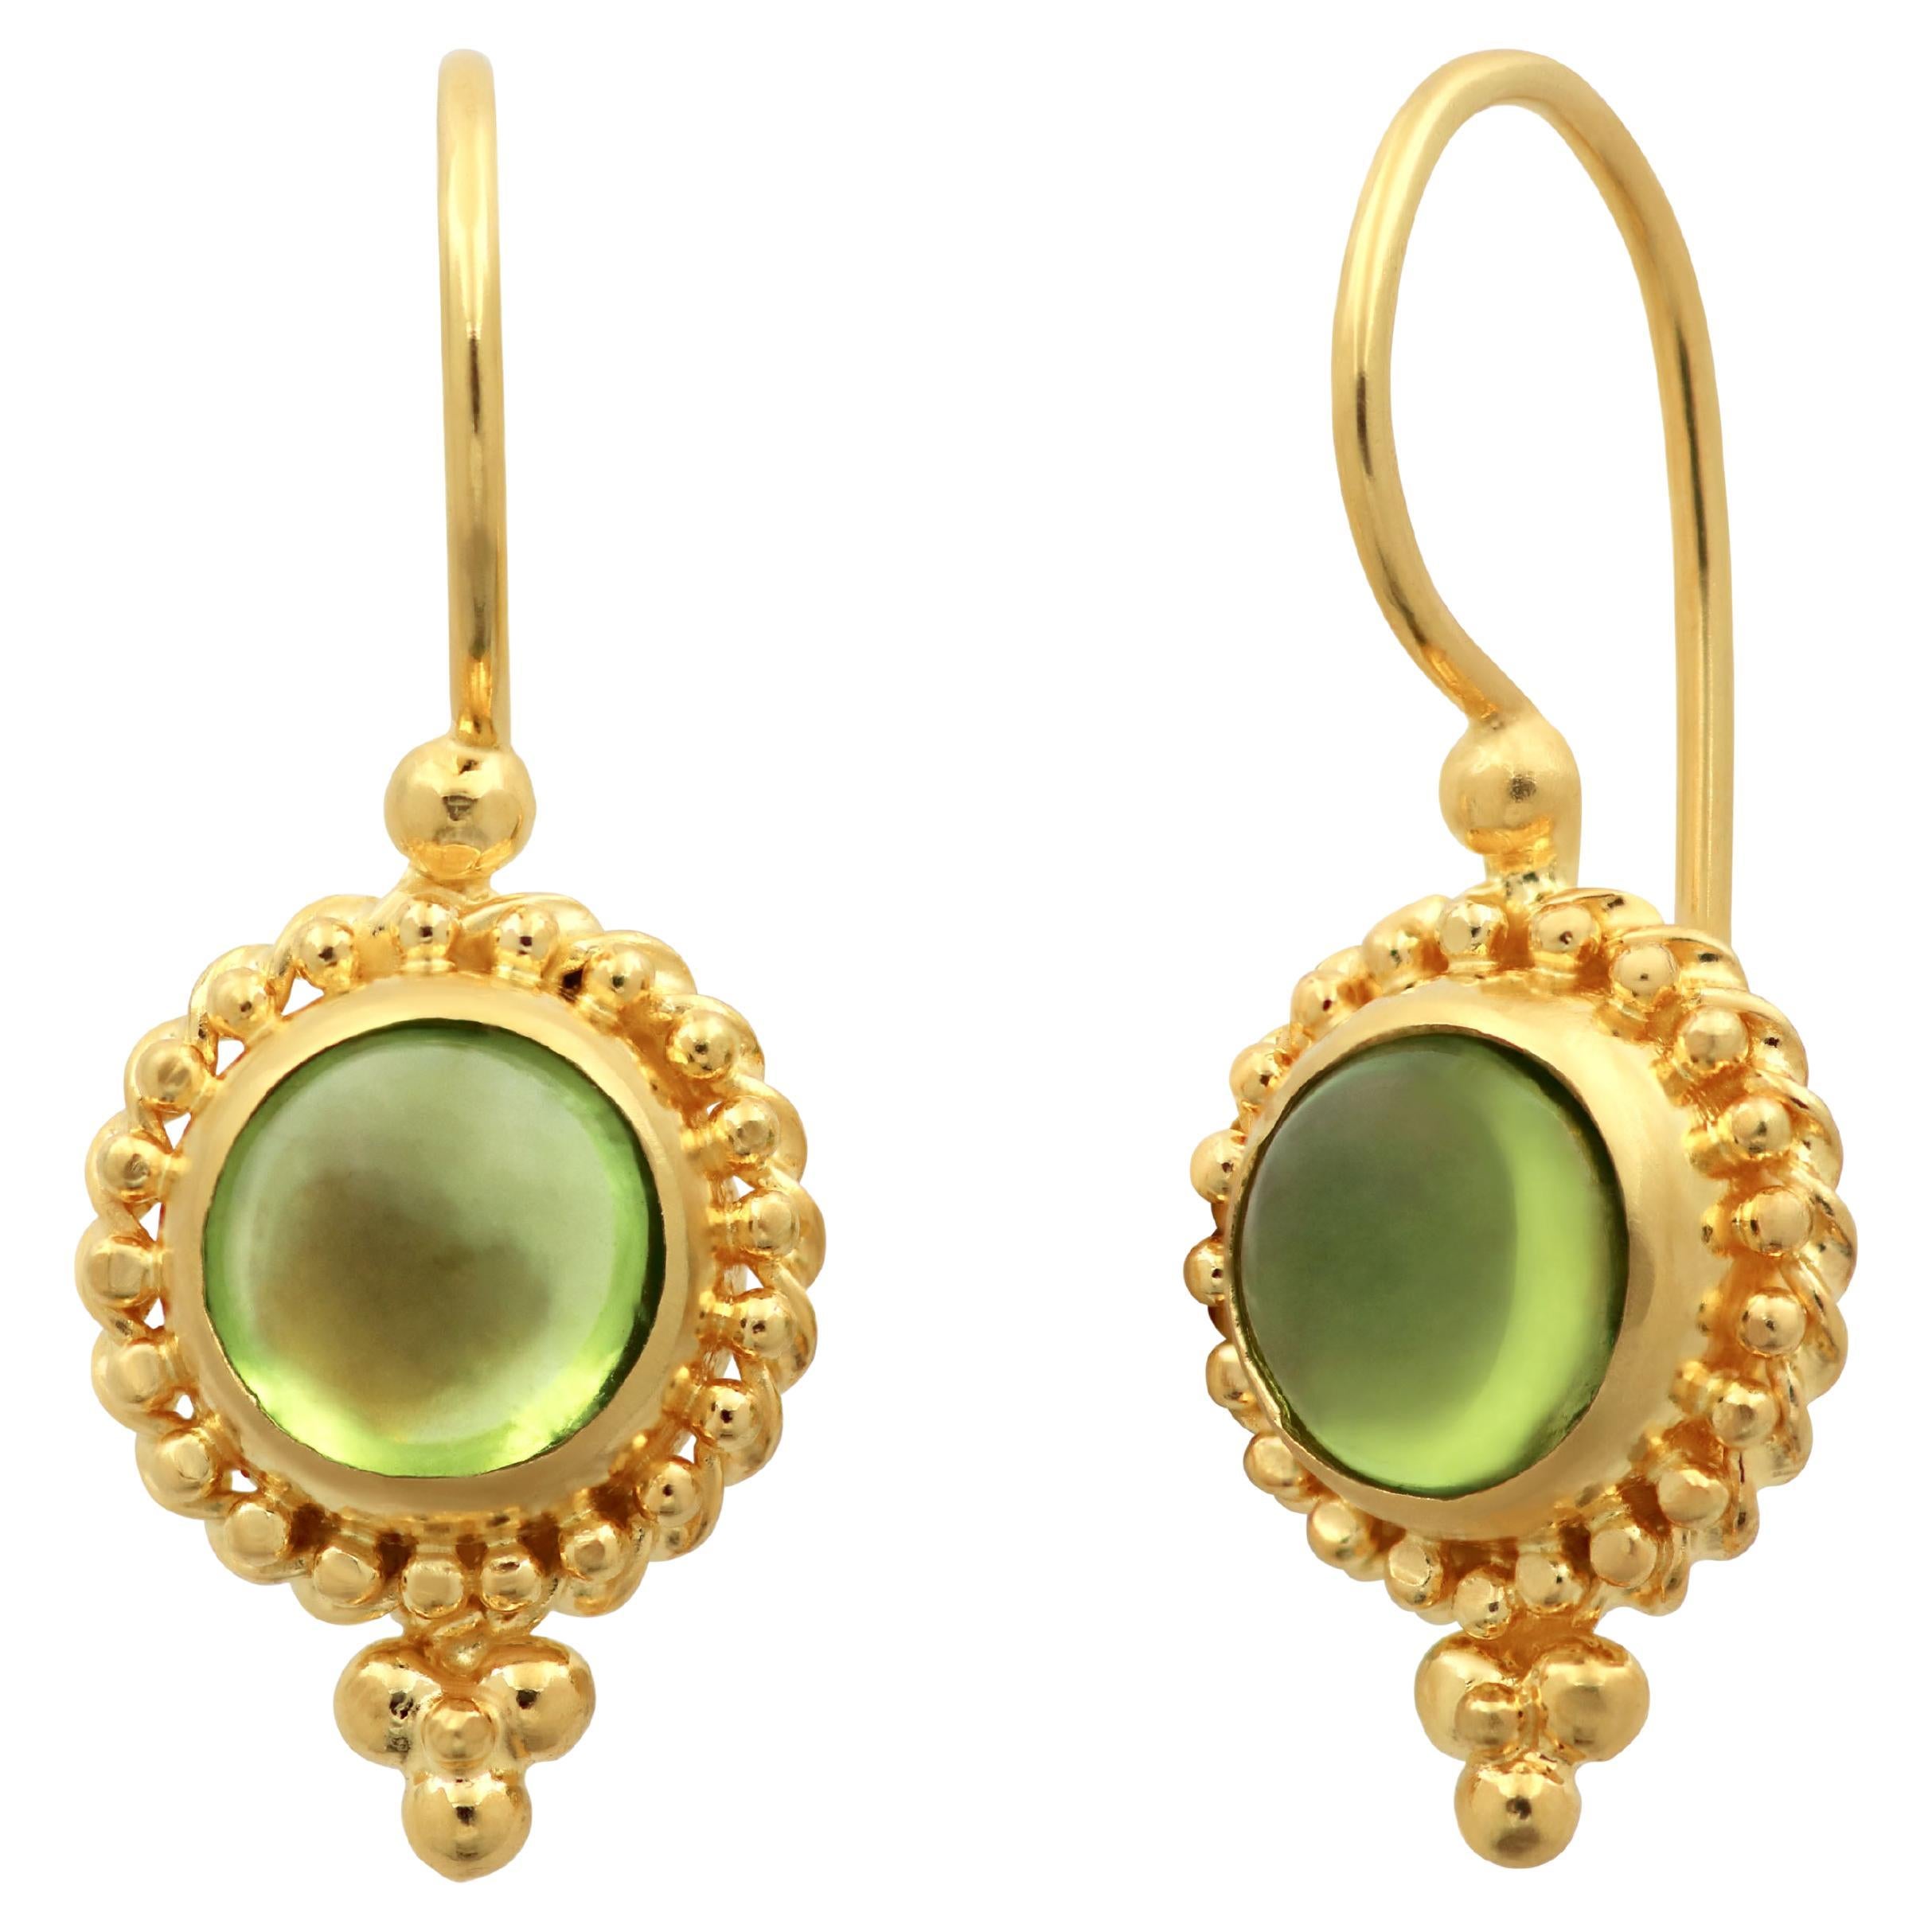 Dimos 18k Yellow Gold Filigree Earrings with Peridot For Sale